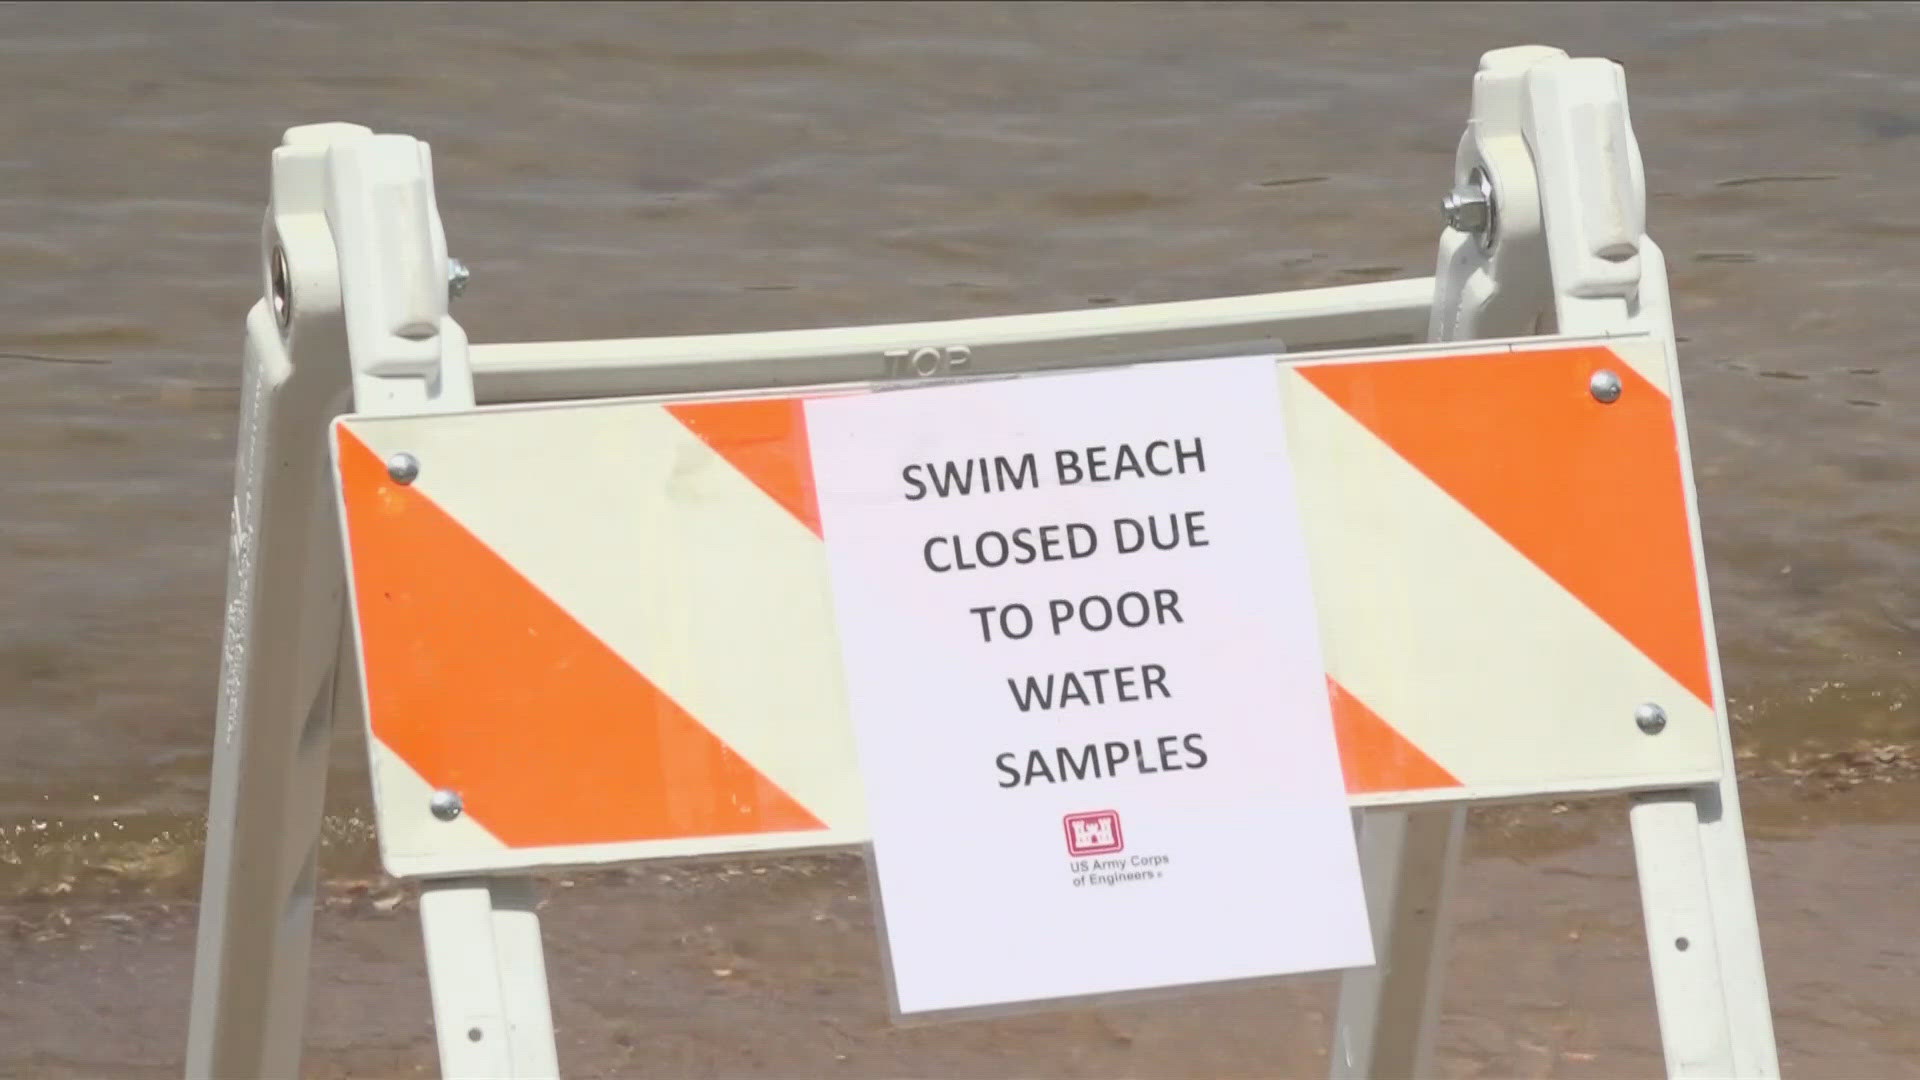 Those with plans to hit the beach this Memorial Day weekend, be advised.